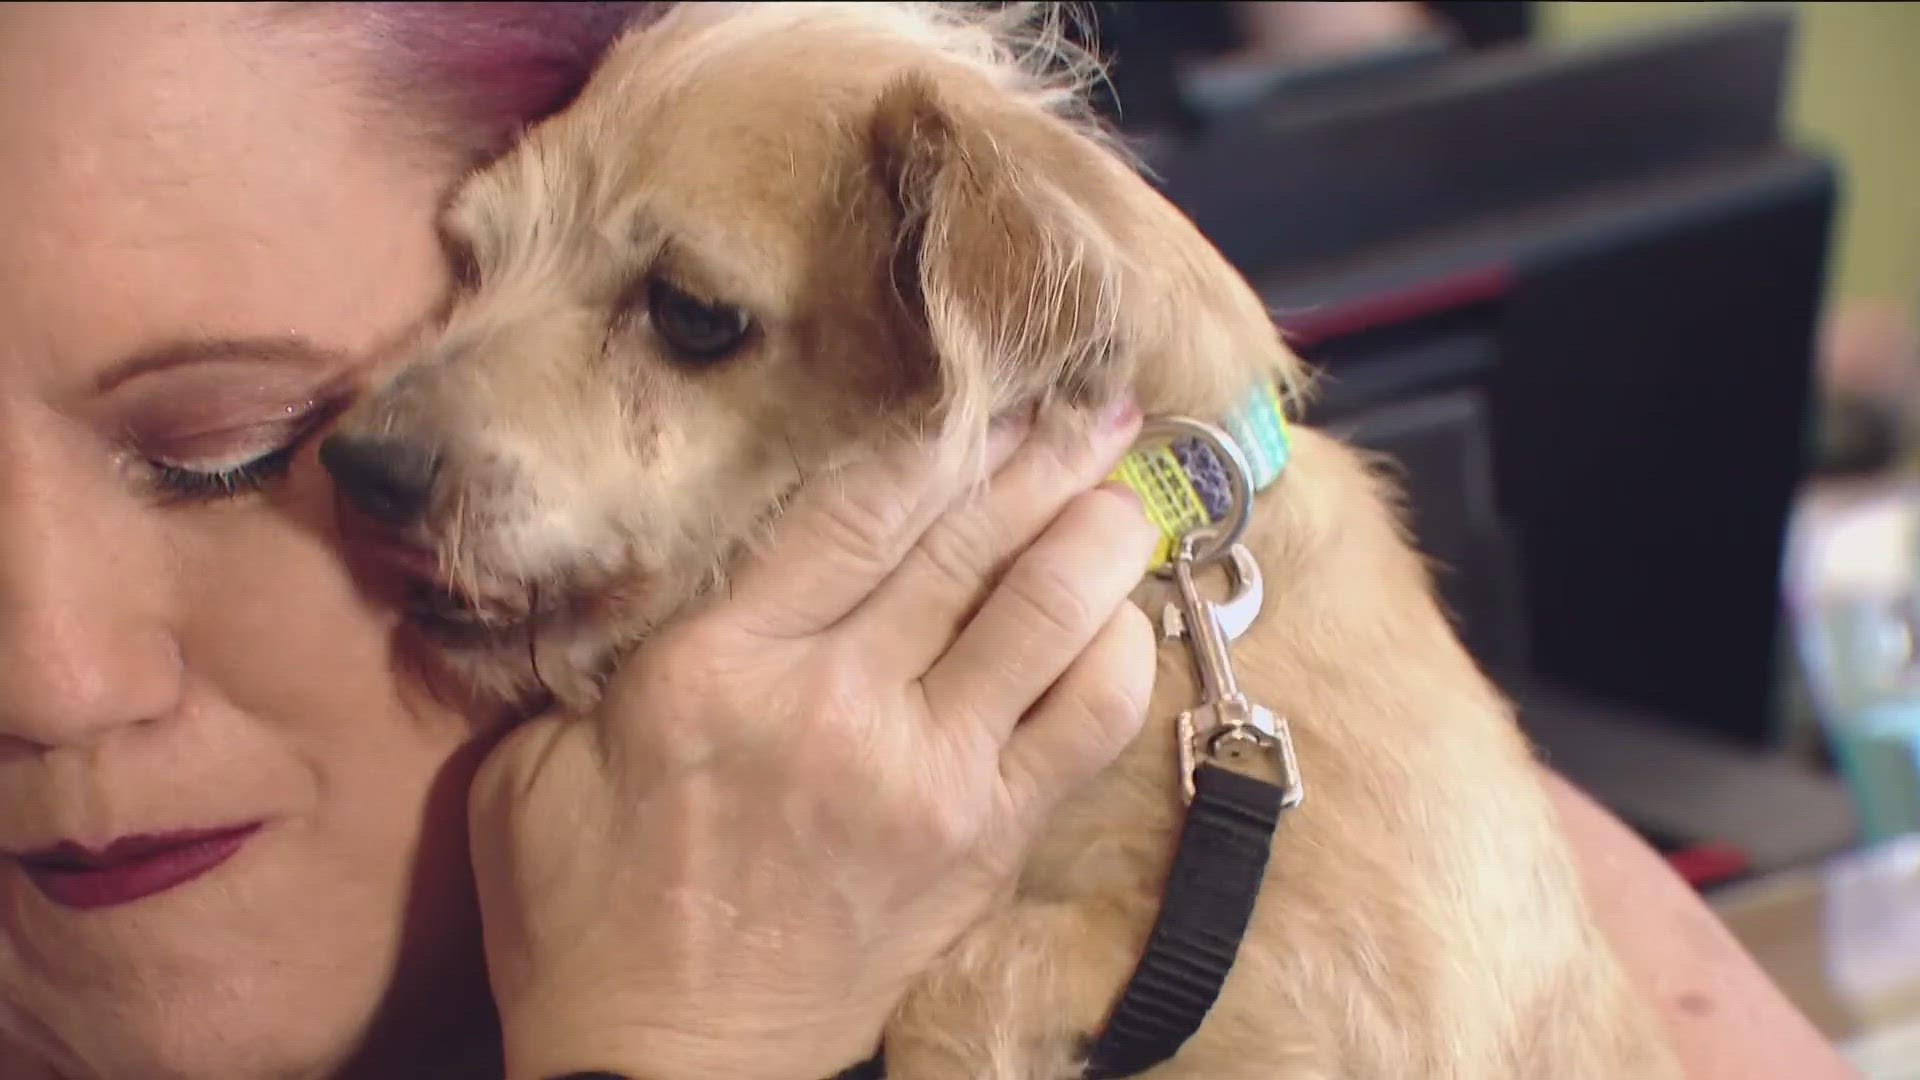 A dog that went missing around July 4 in San Diego was reunited with his owners in Las Vegas.